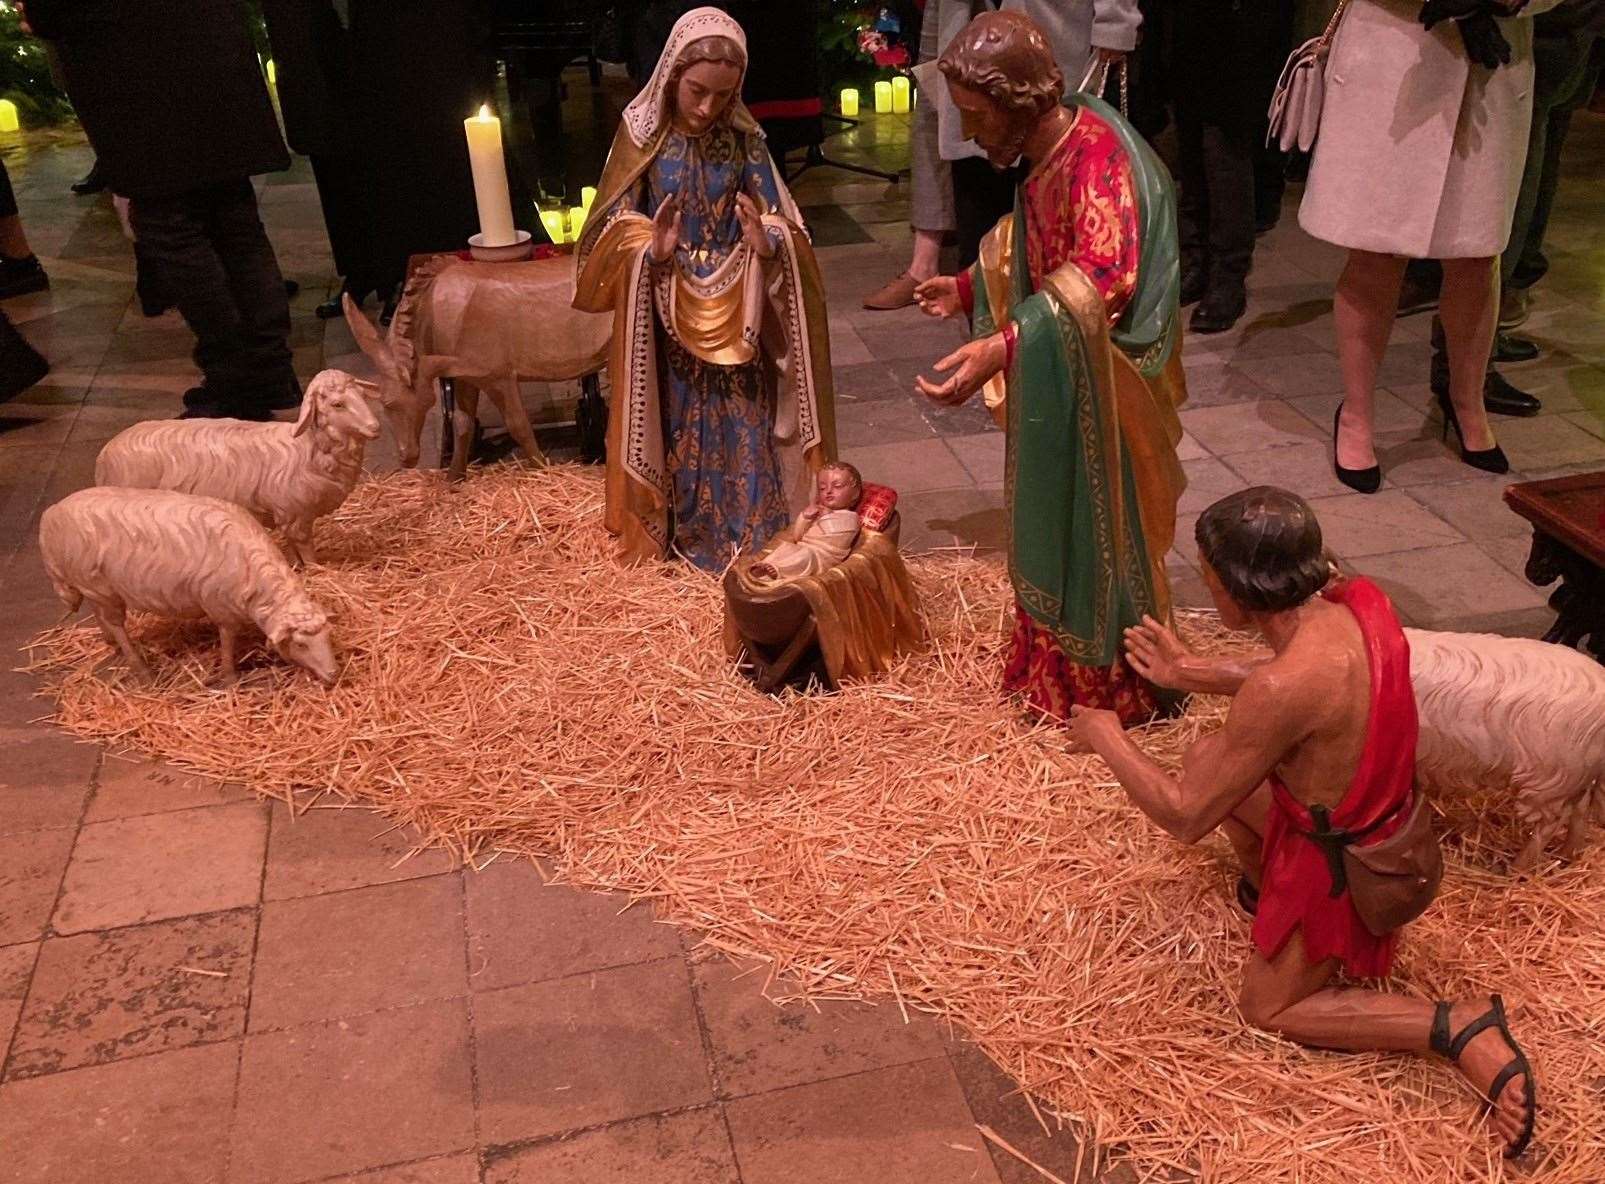 Nativity scene at Westminster Abbey.